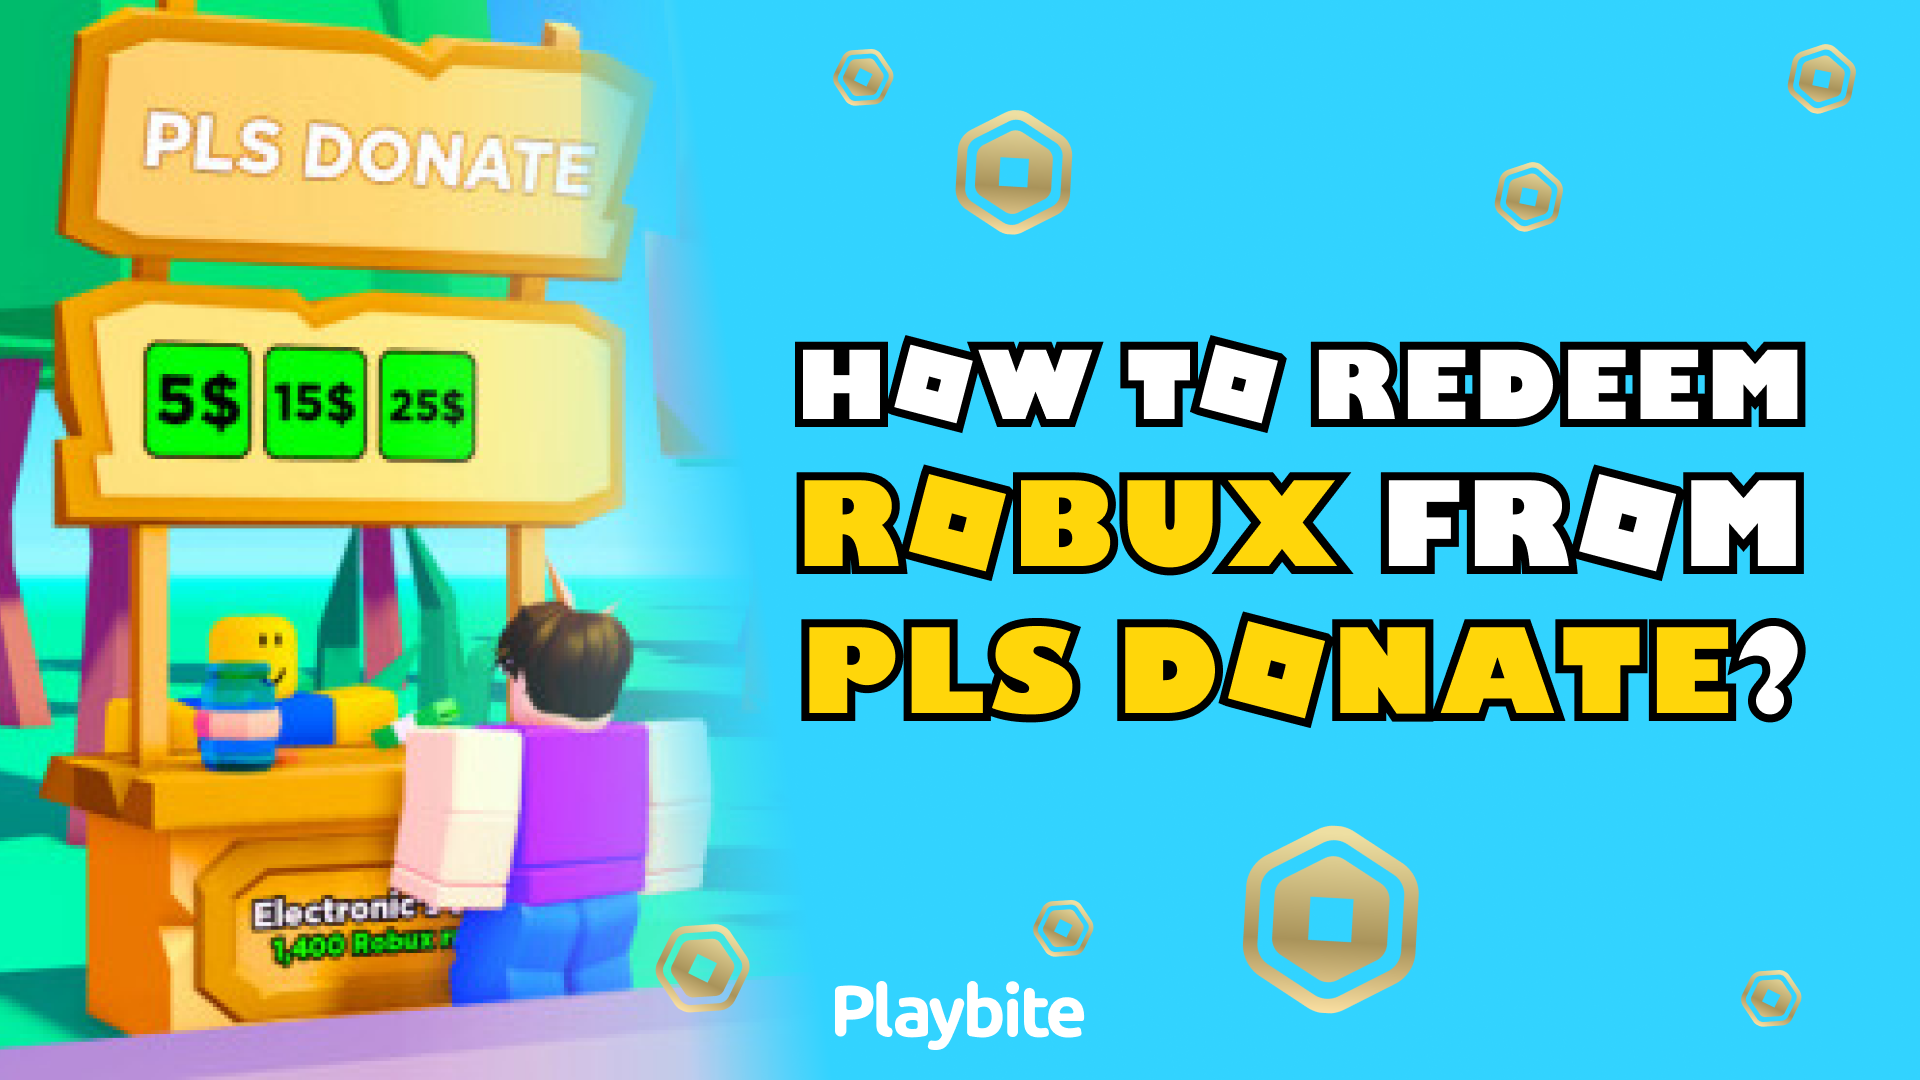 This Roblox Game Gives 1 MILLION FREE ROBUX.. 